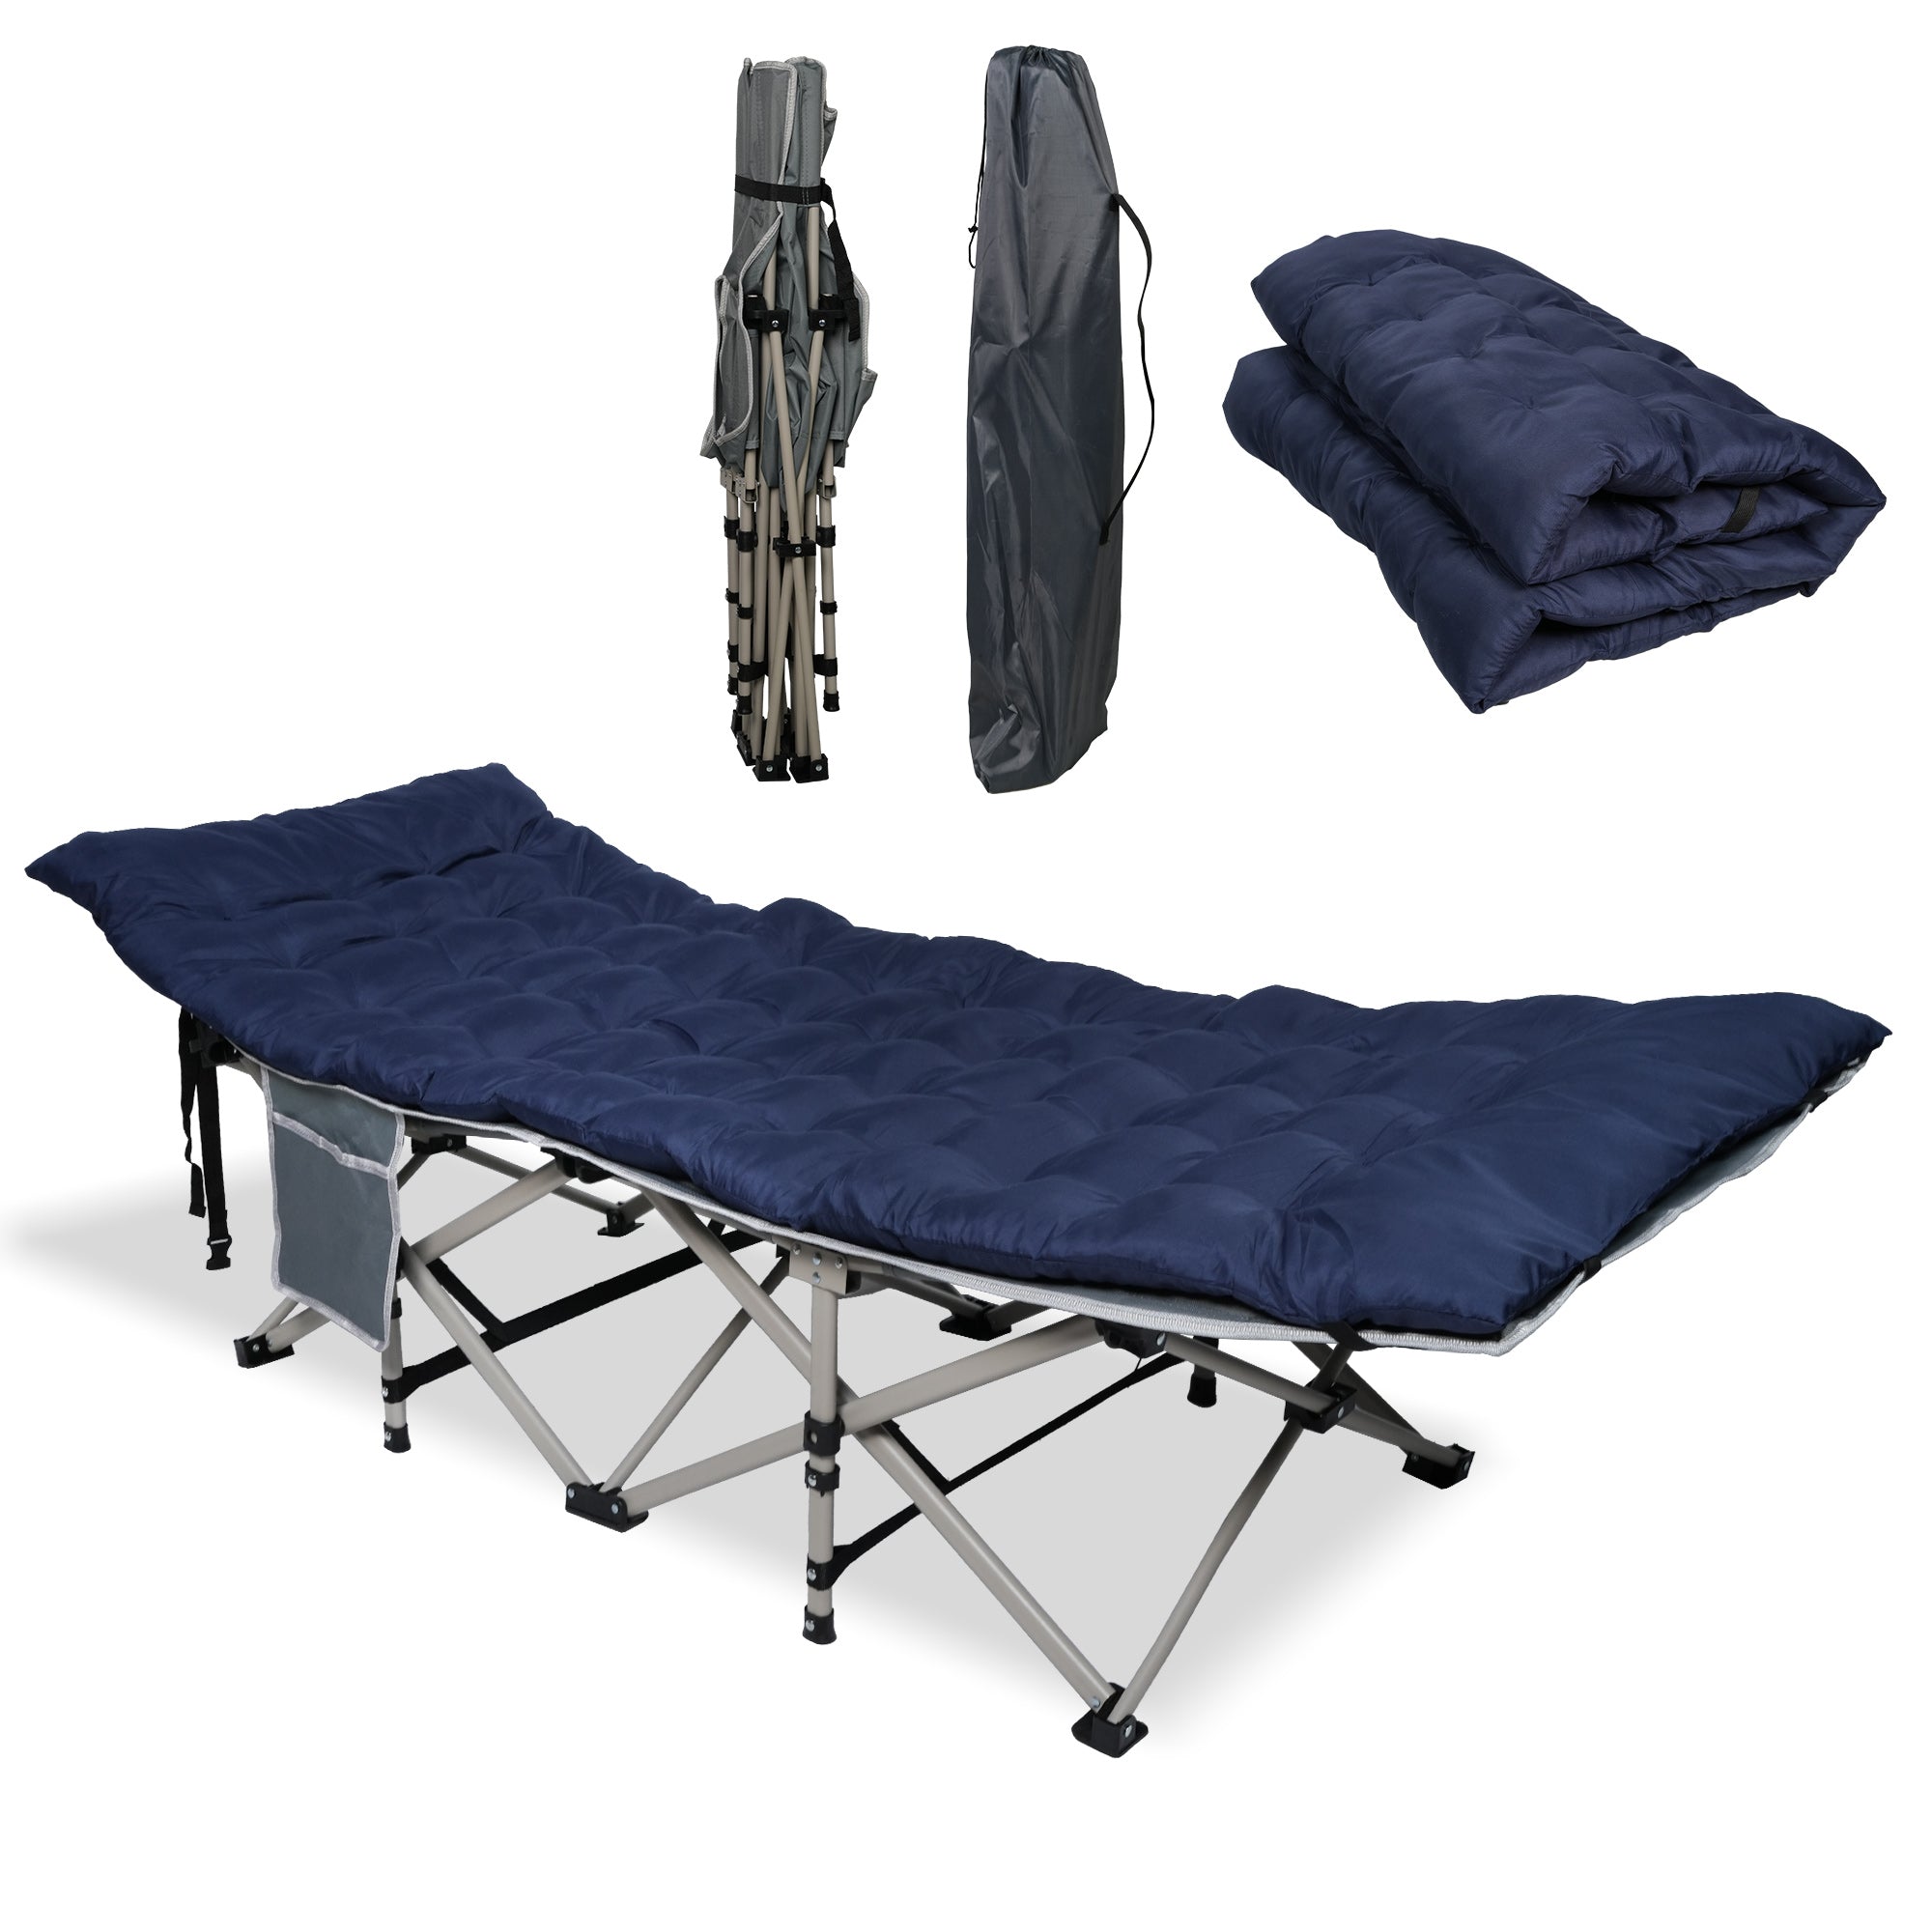 LUCKYERMORE Portable Folding Camping Cots Sleeping Cots with Removable Mattress Carry Bag, Dark Blue